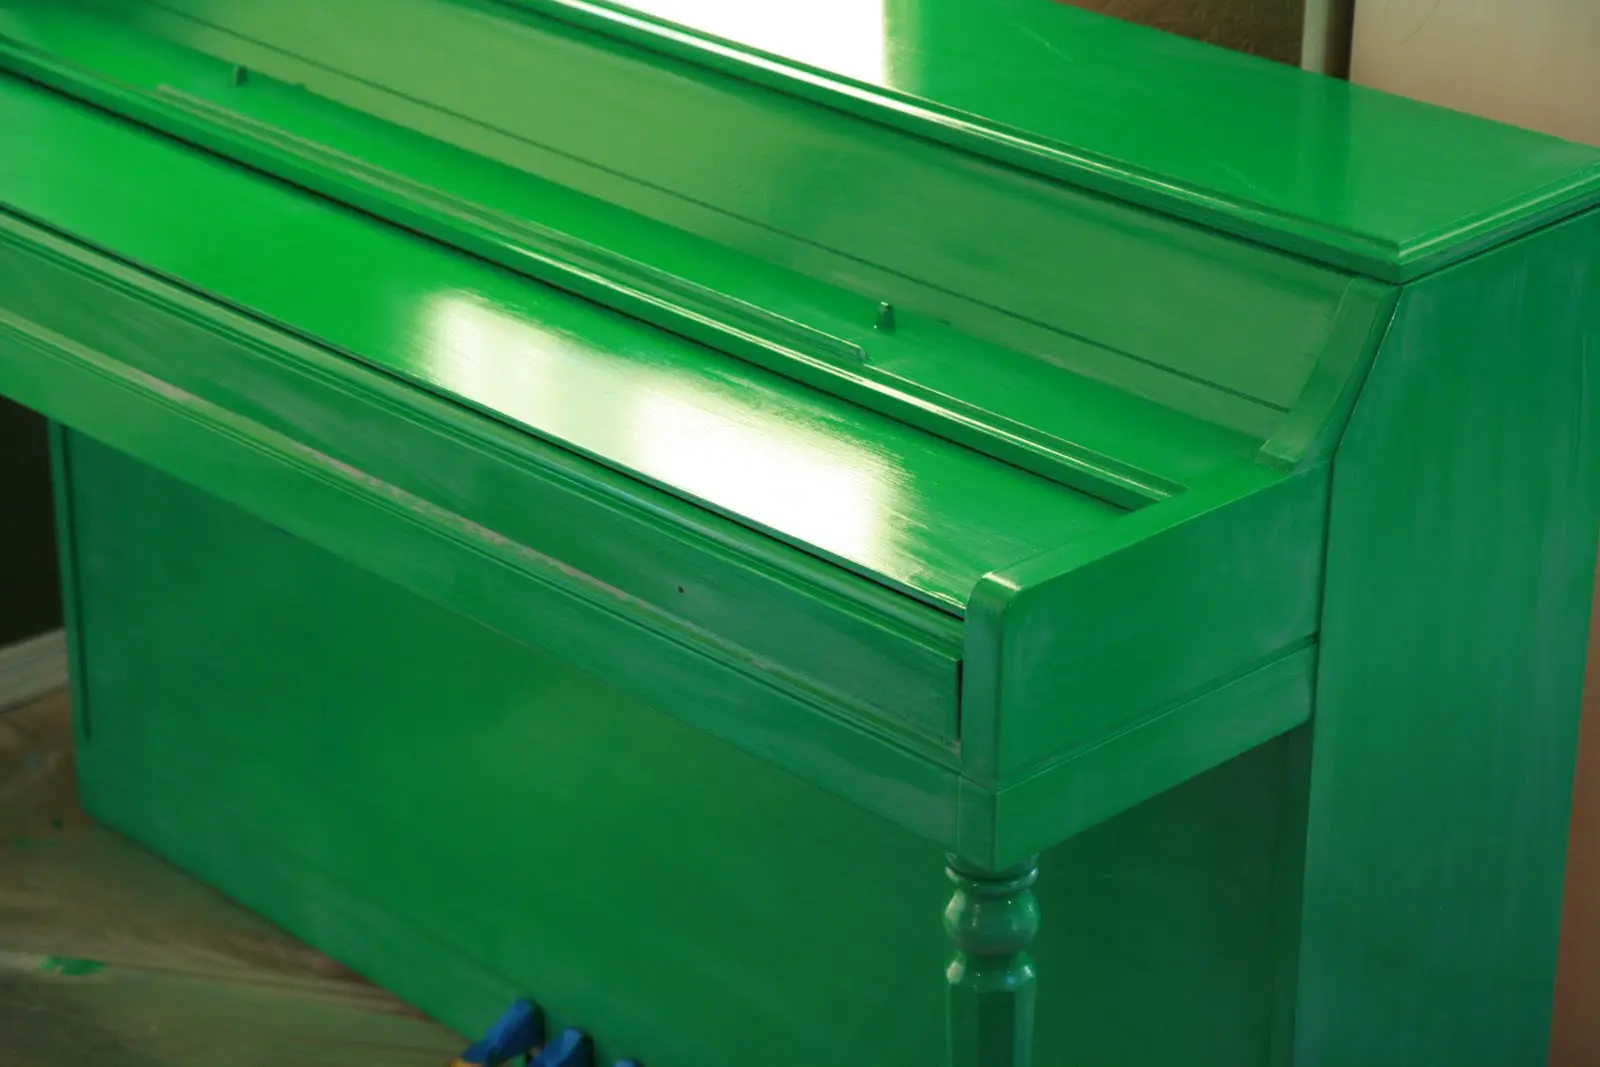 Wood piano painted with oil based green paint